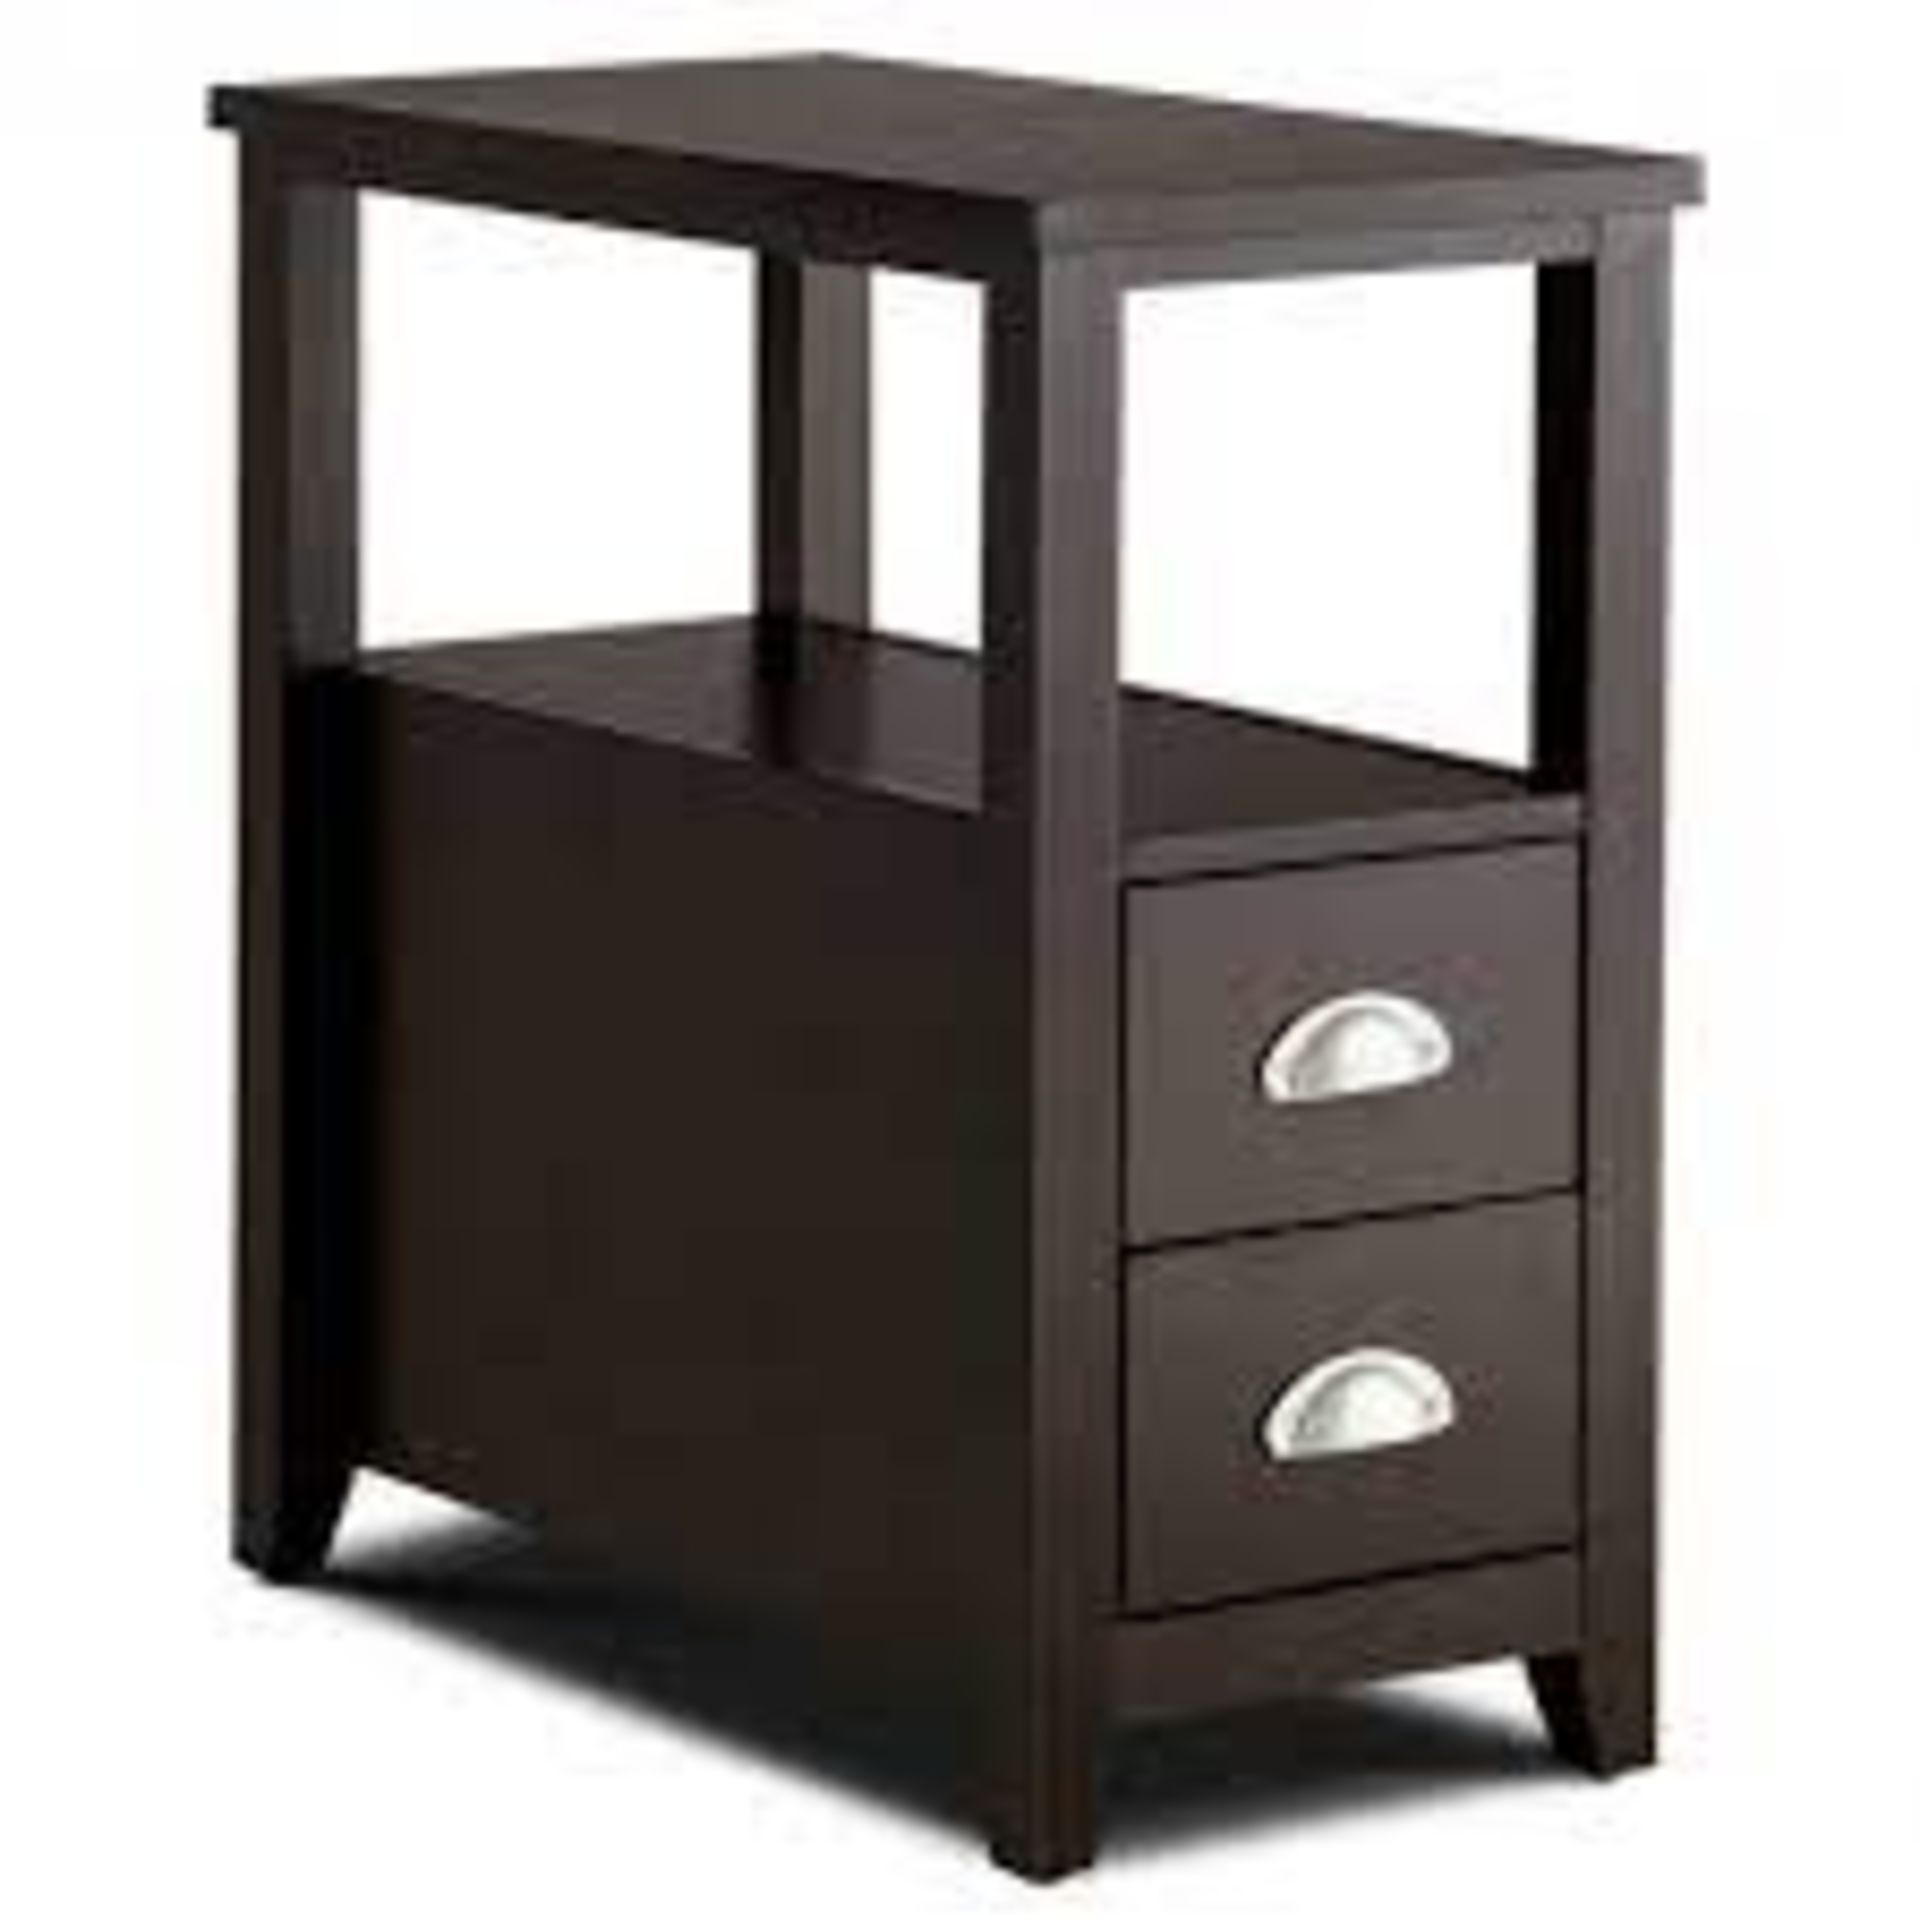 End Table Wooden With 2 Drawers And Shelf Bedside Table - ER53